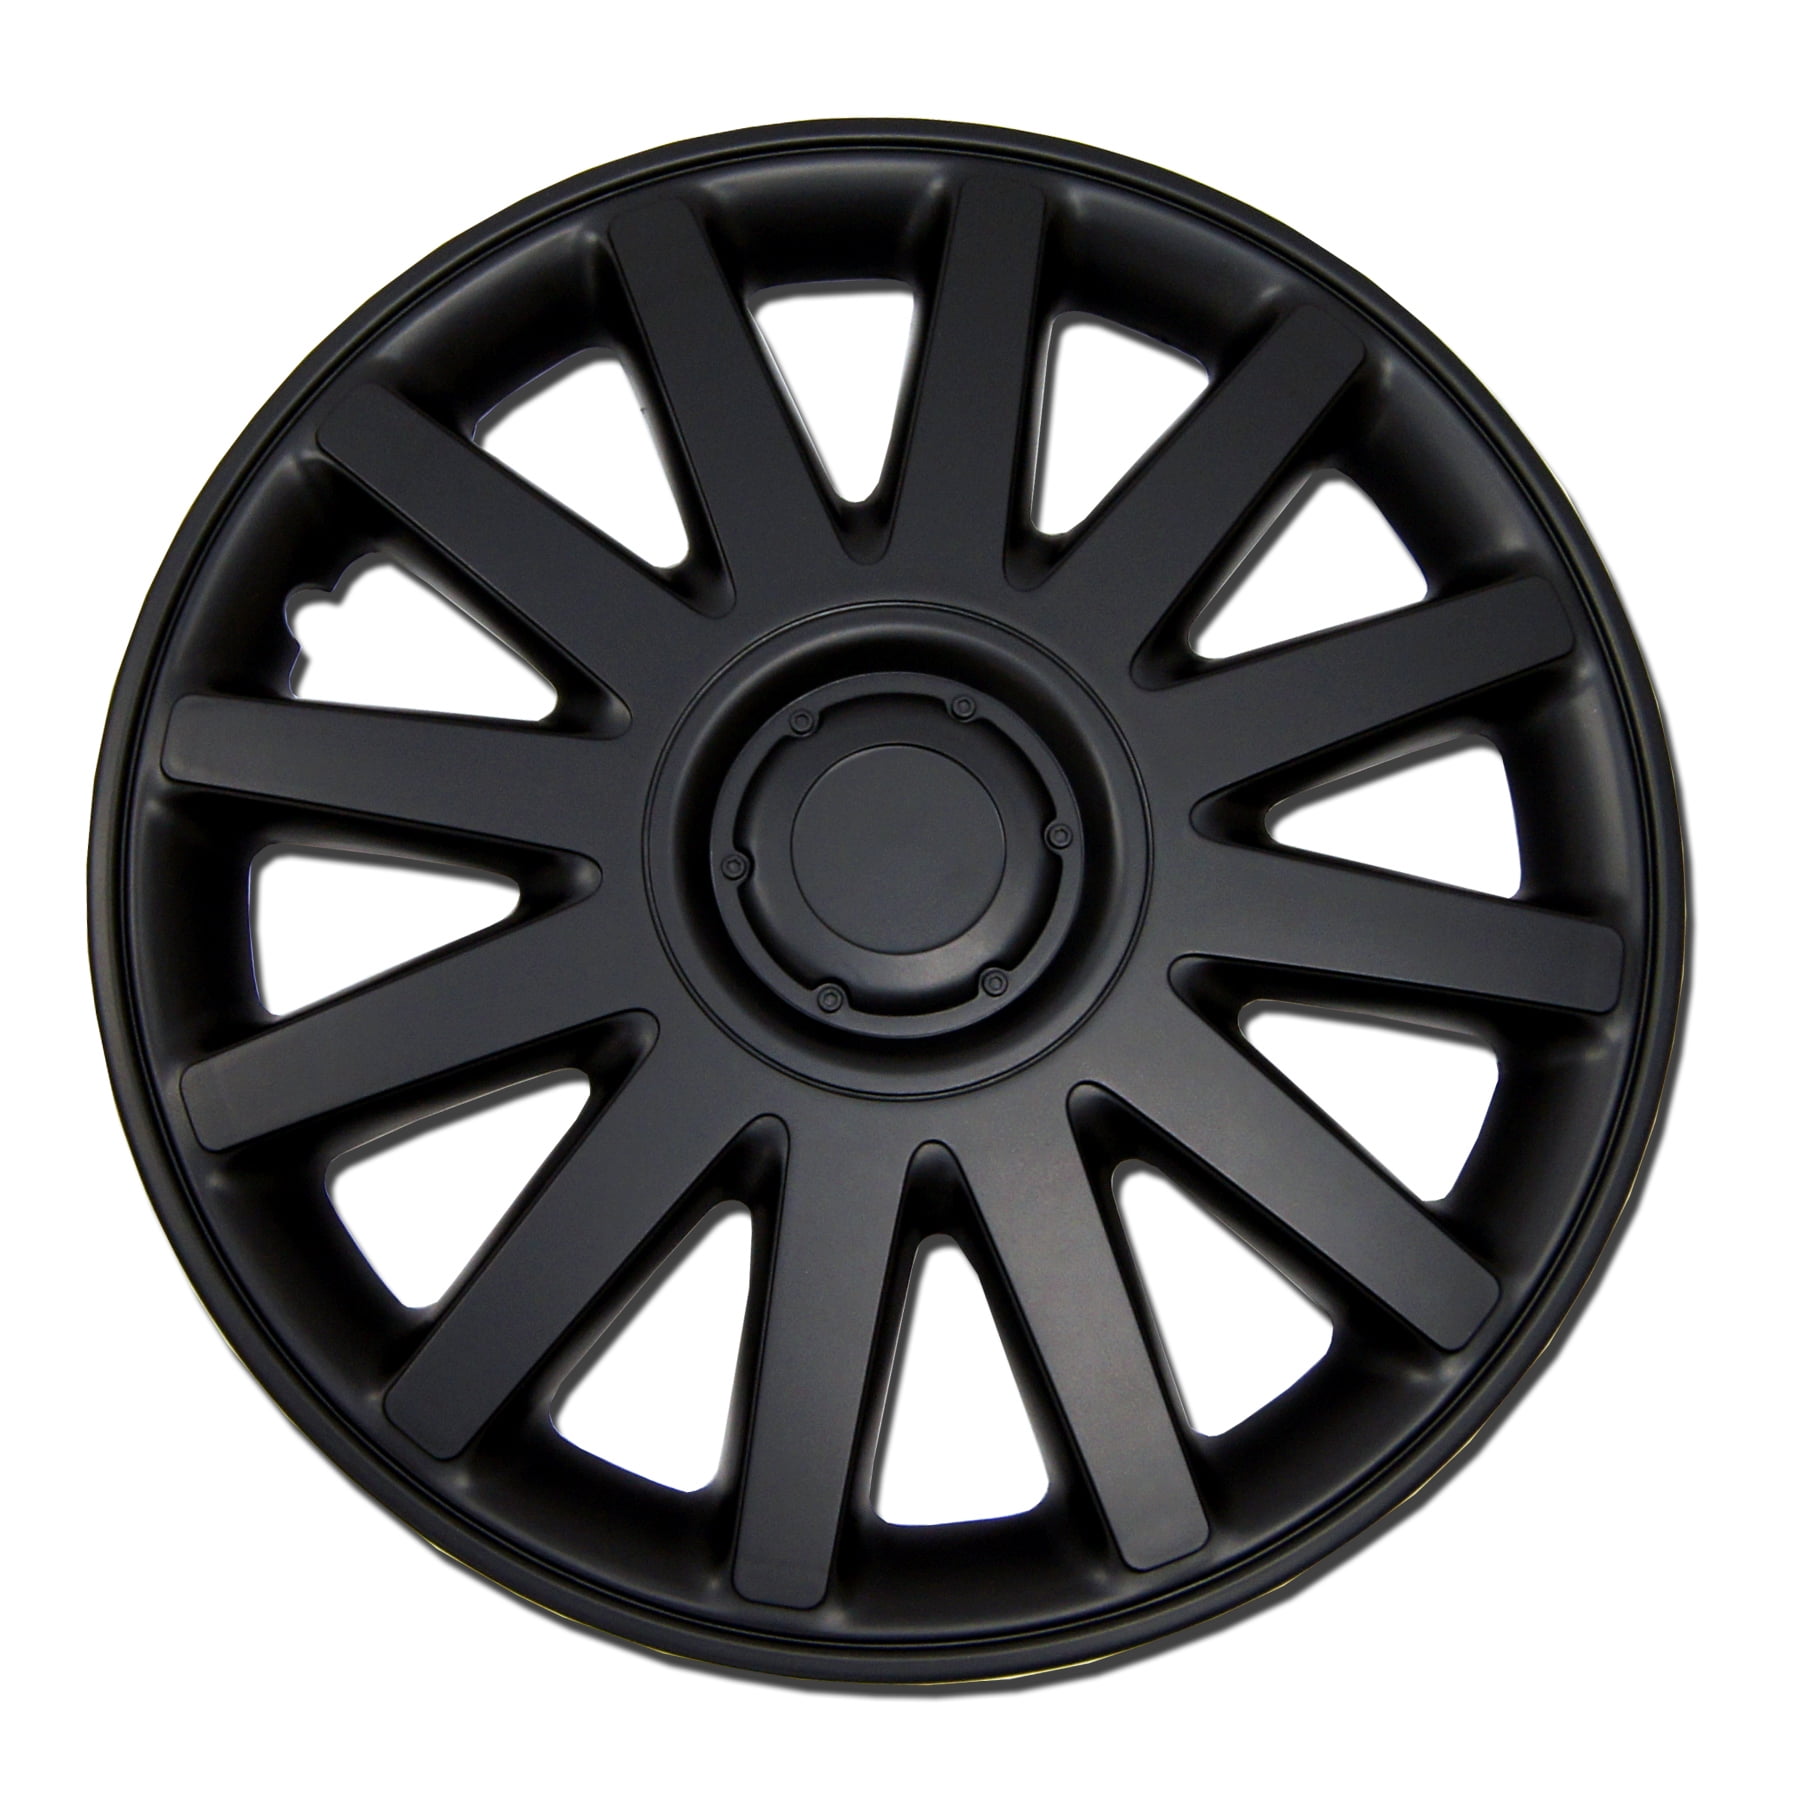 TuningPros WSC-610B15 Hubcaps Wheel Skin Cover 15-Inches Matte Black Set of 4 